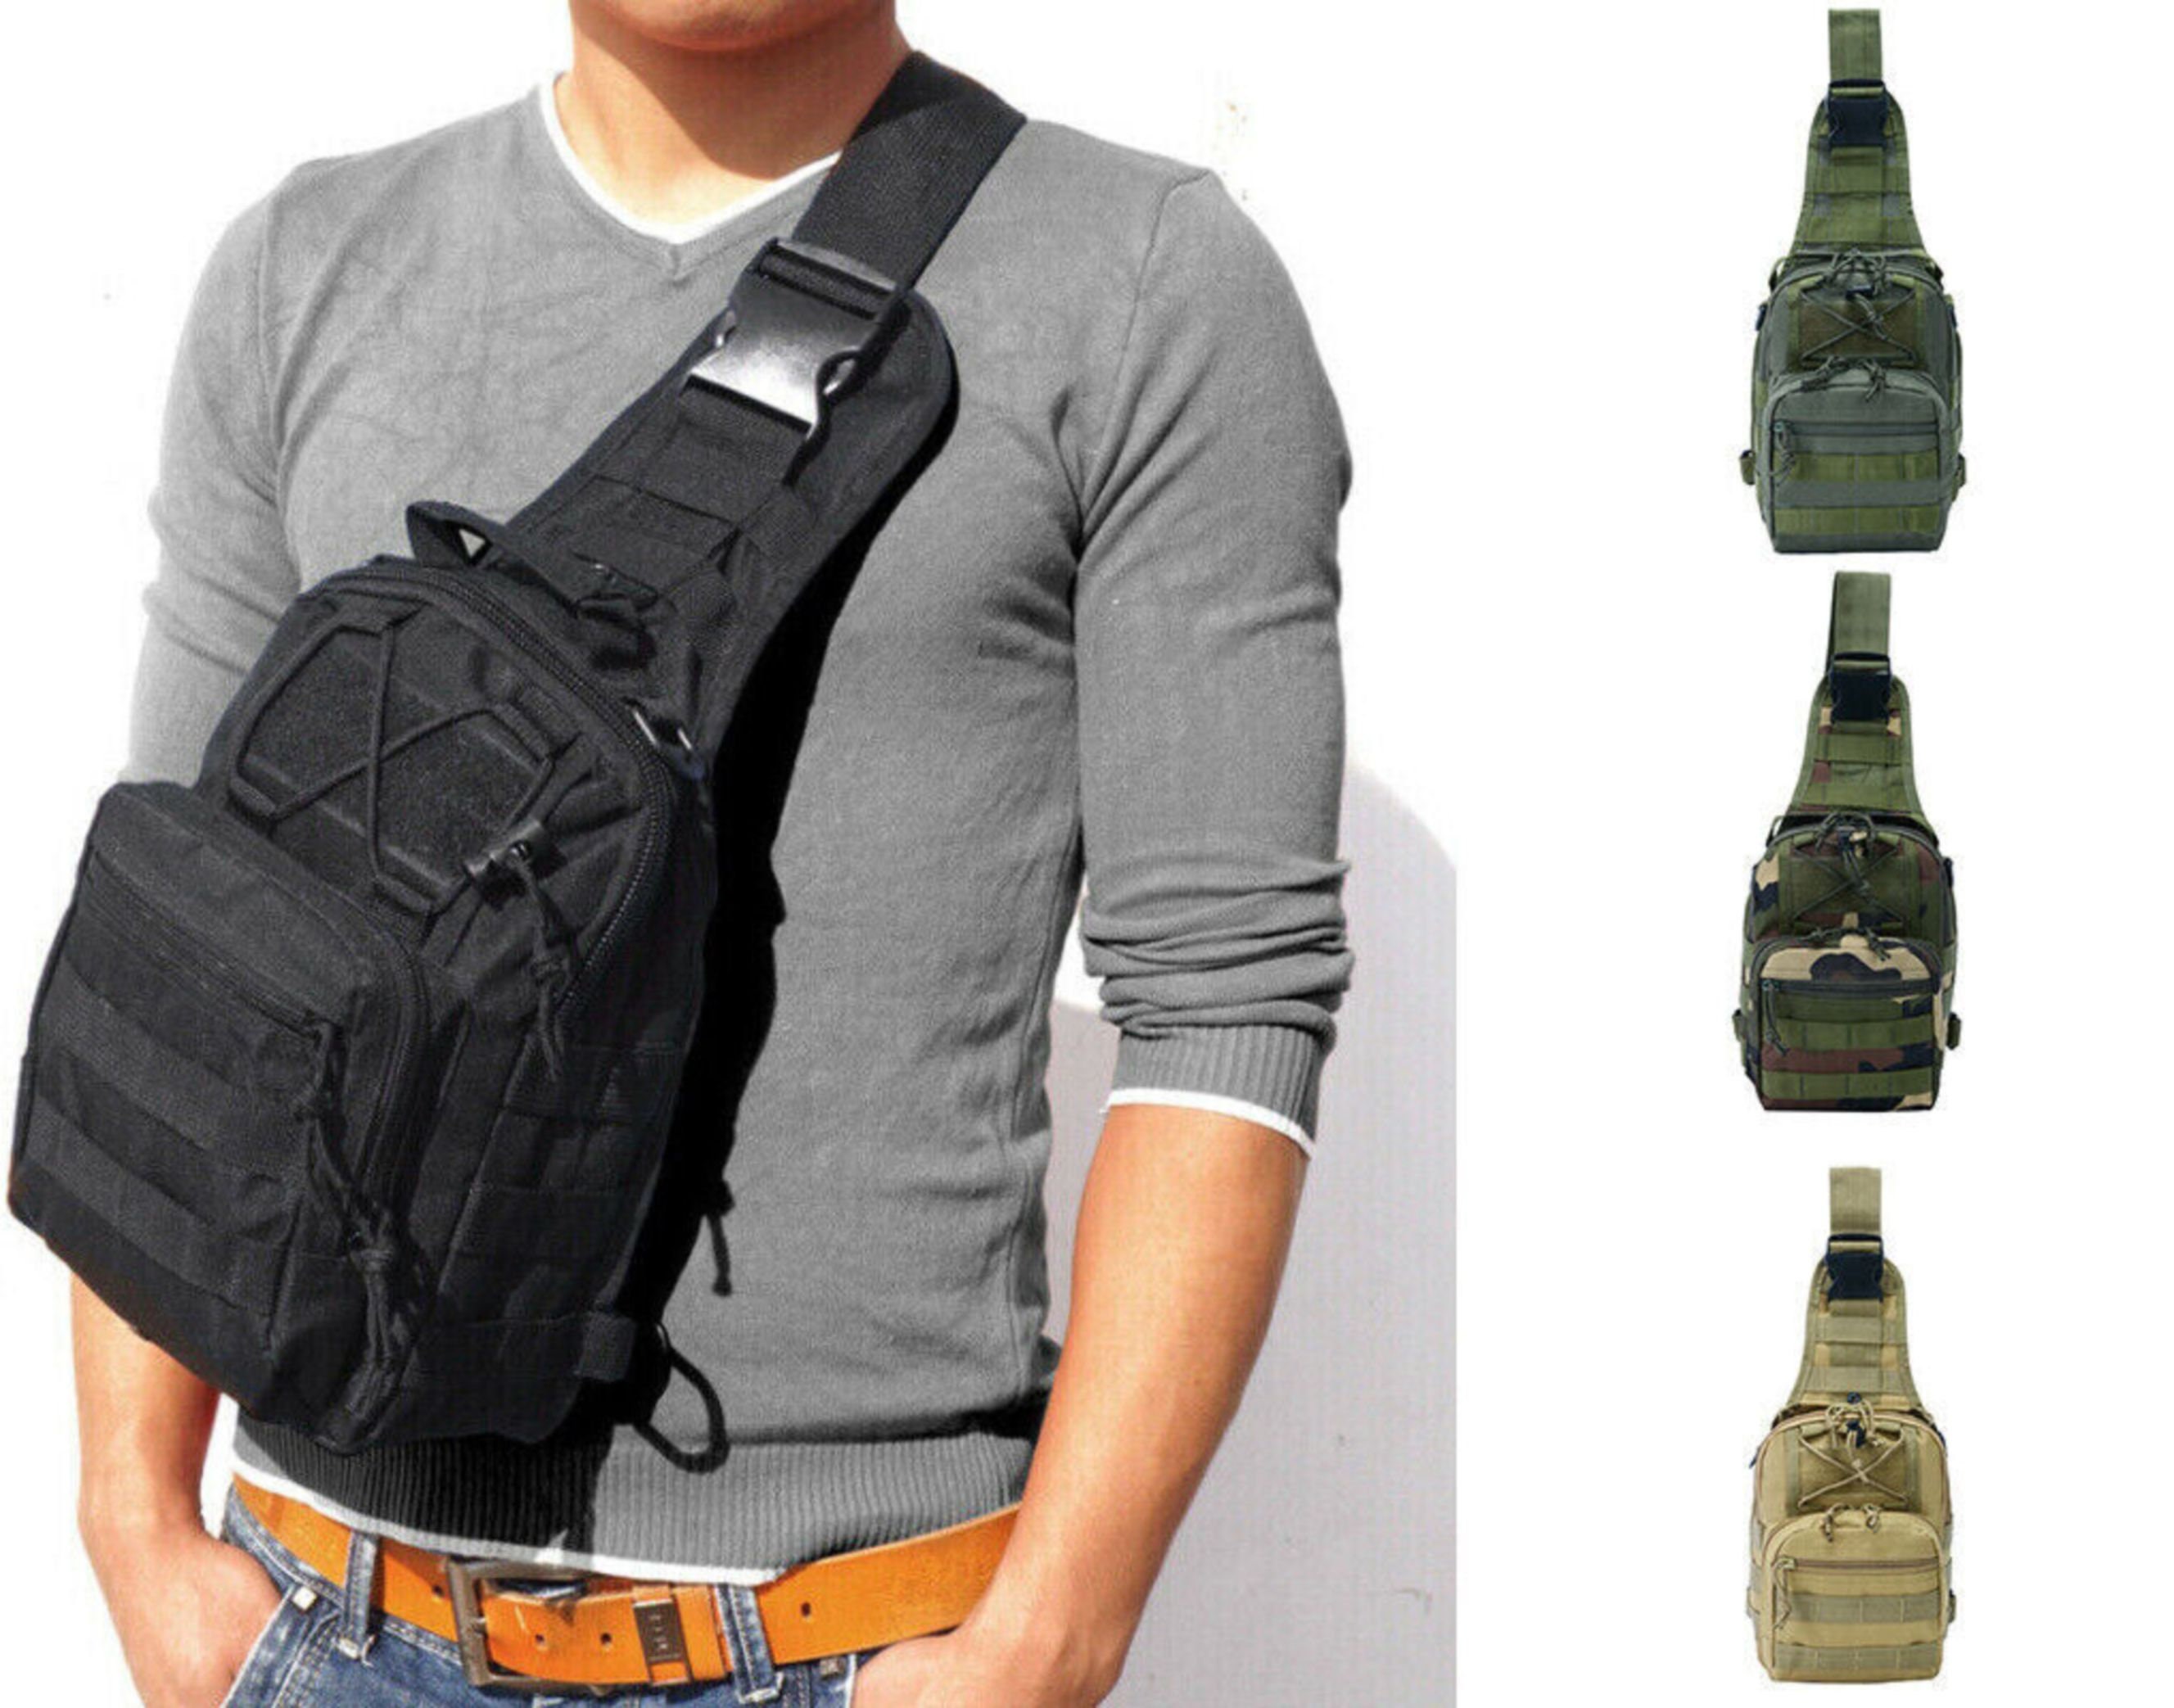 Buy Tactical Chest Bag Online In India -  India